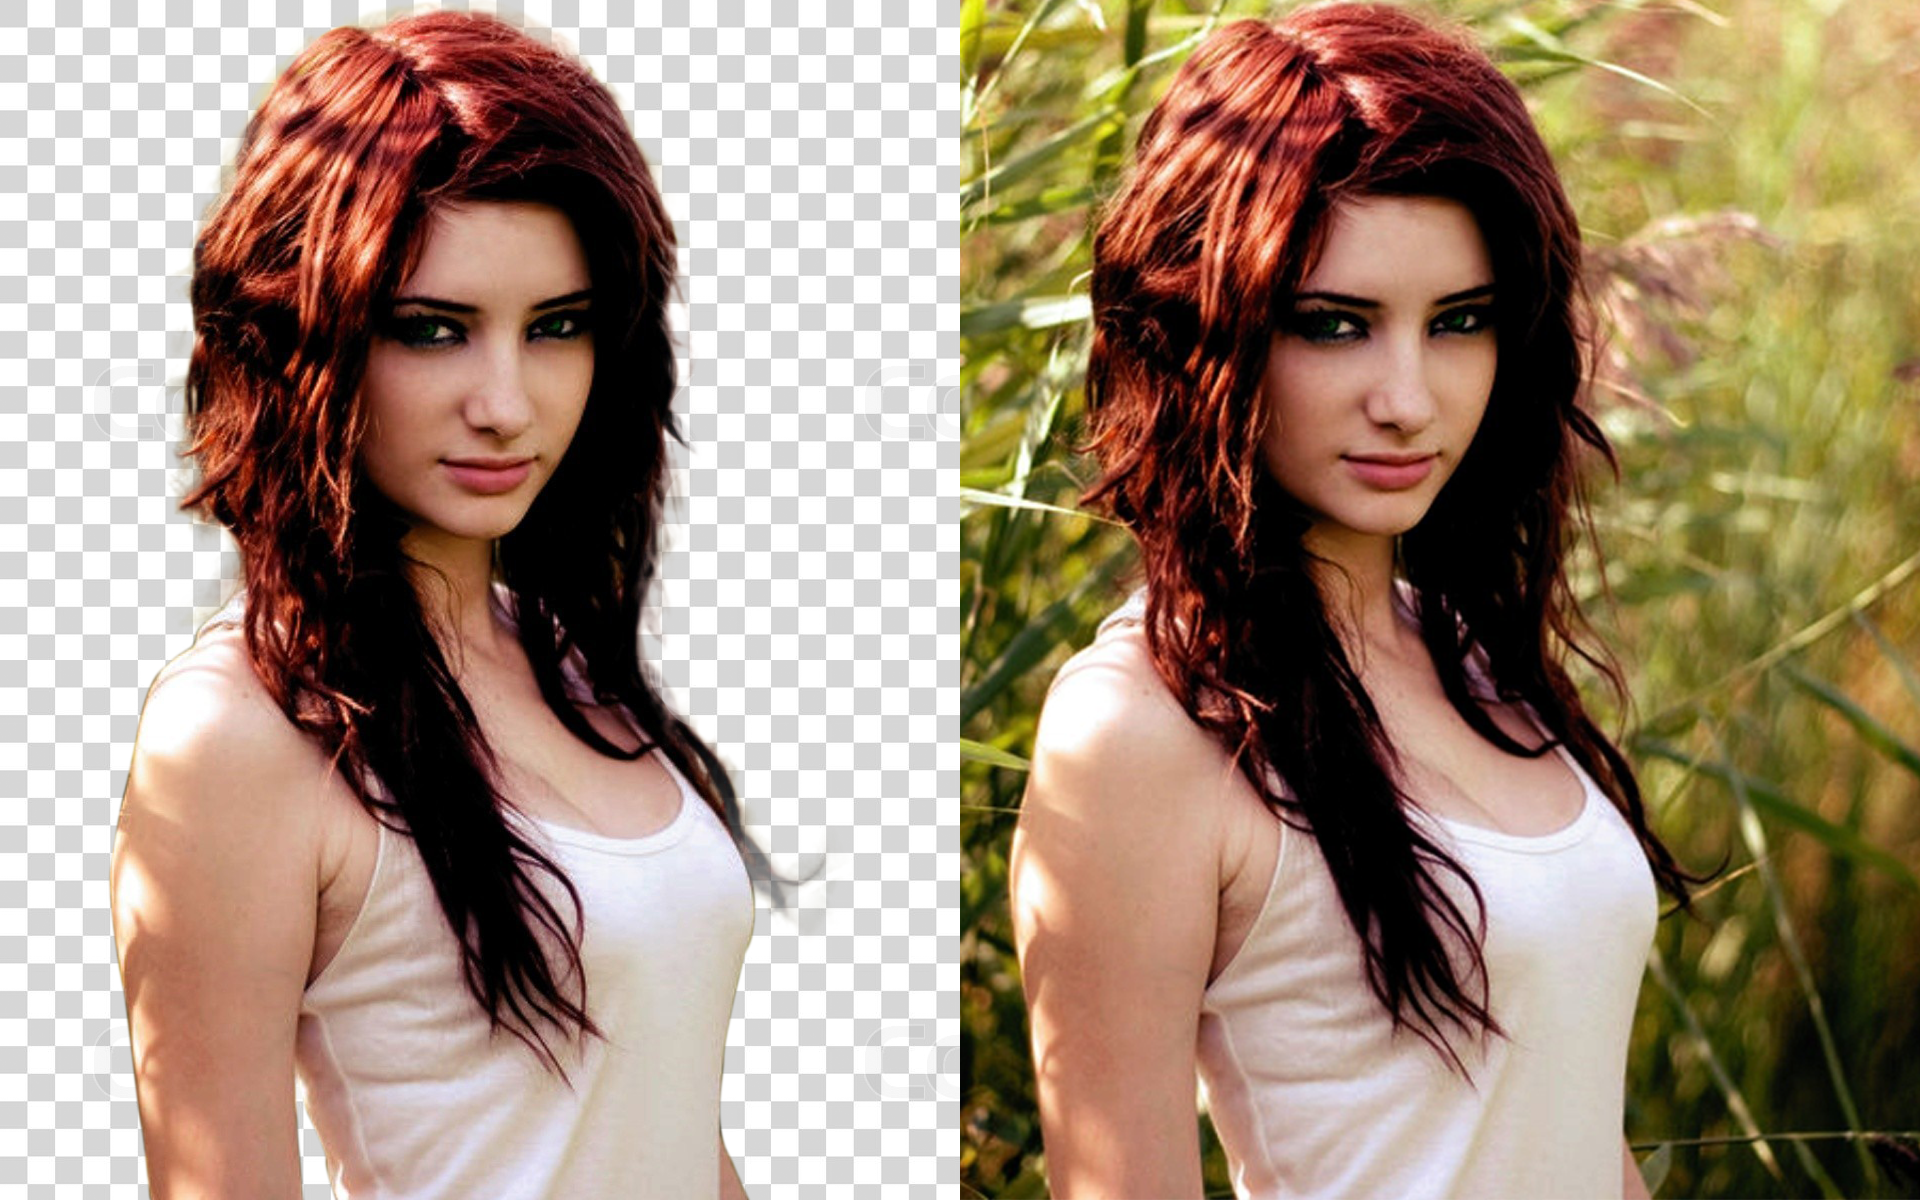 Remove Background of Any 10 Images in 24 Hours for $5 ...